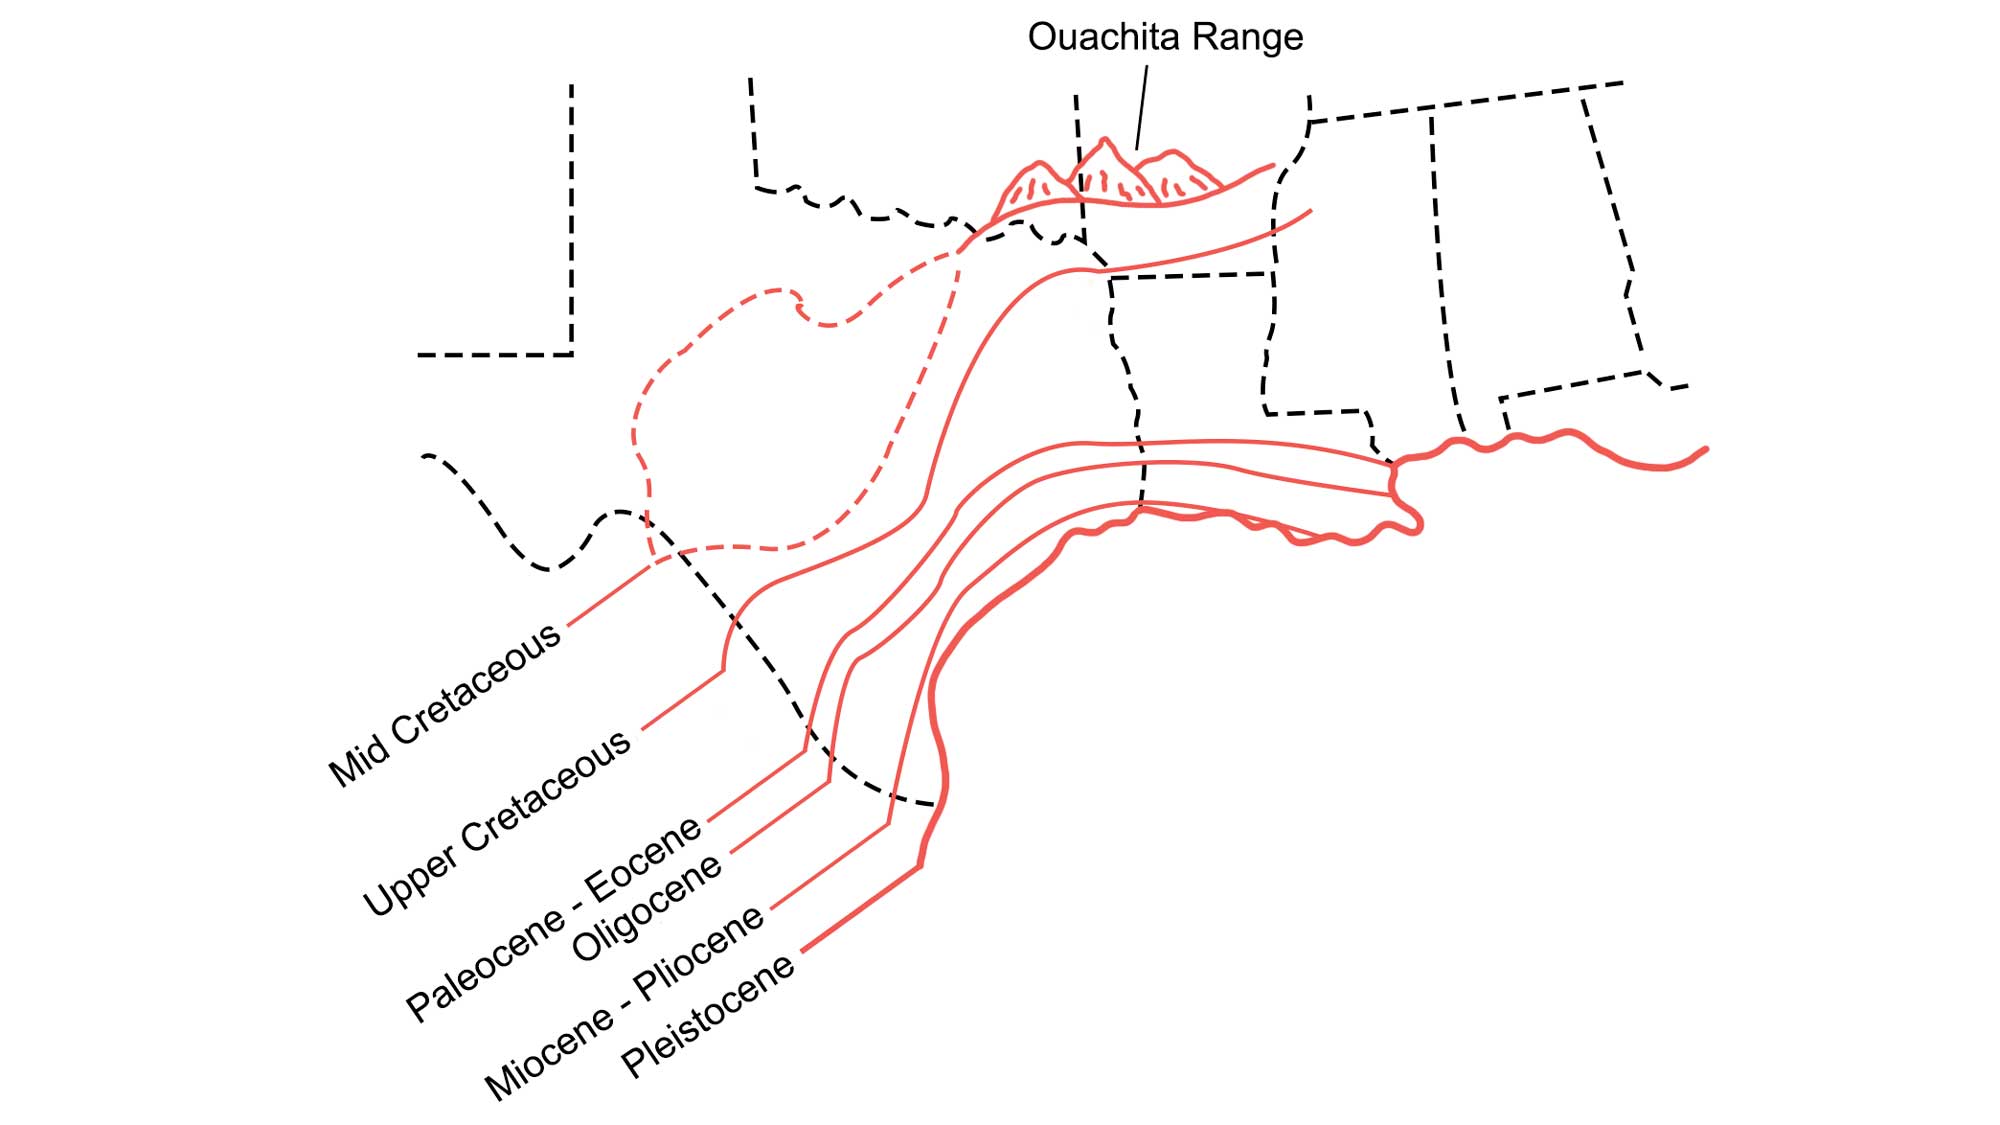 Image showing shoreline positions along the Gulf Coastal Plain over the past 140 million years.